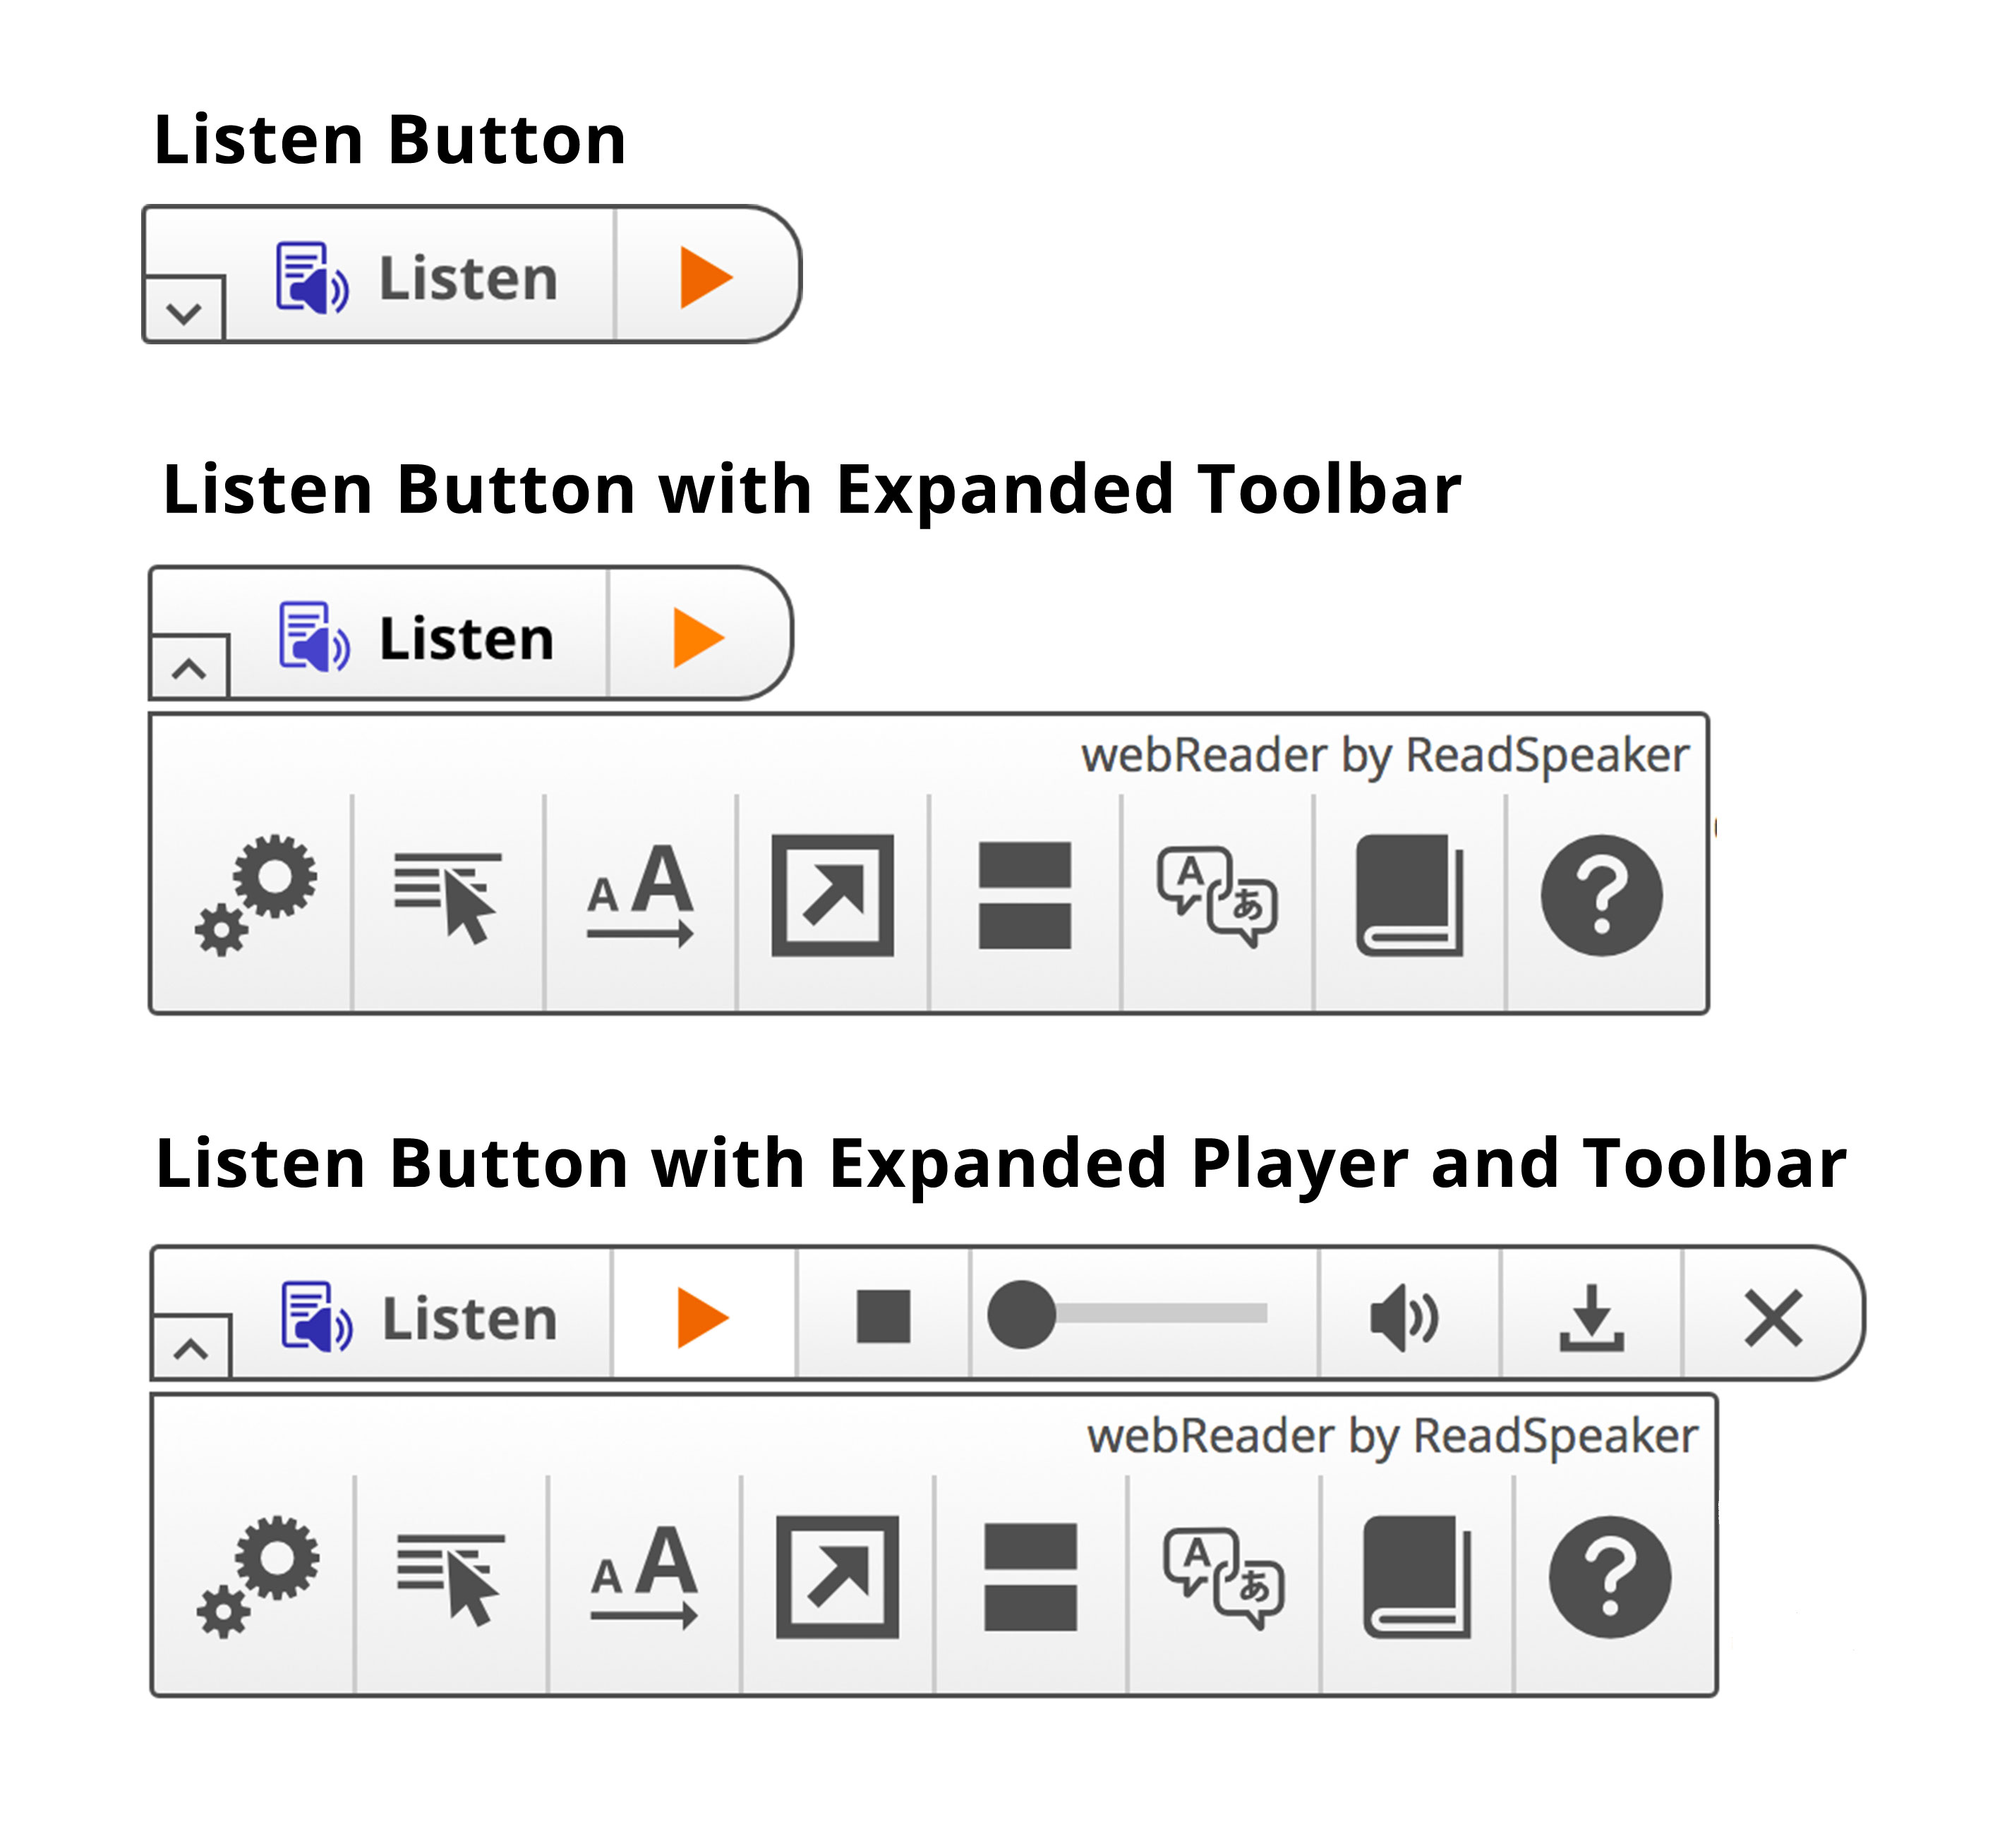 Images of Listen Button, Listen Button with Expanded Toolbar, Listen Button with Expanded Player and Toolbar